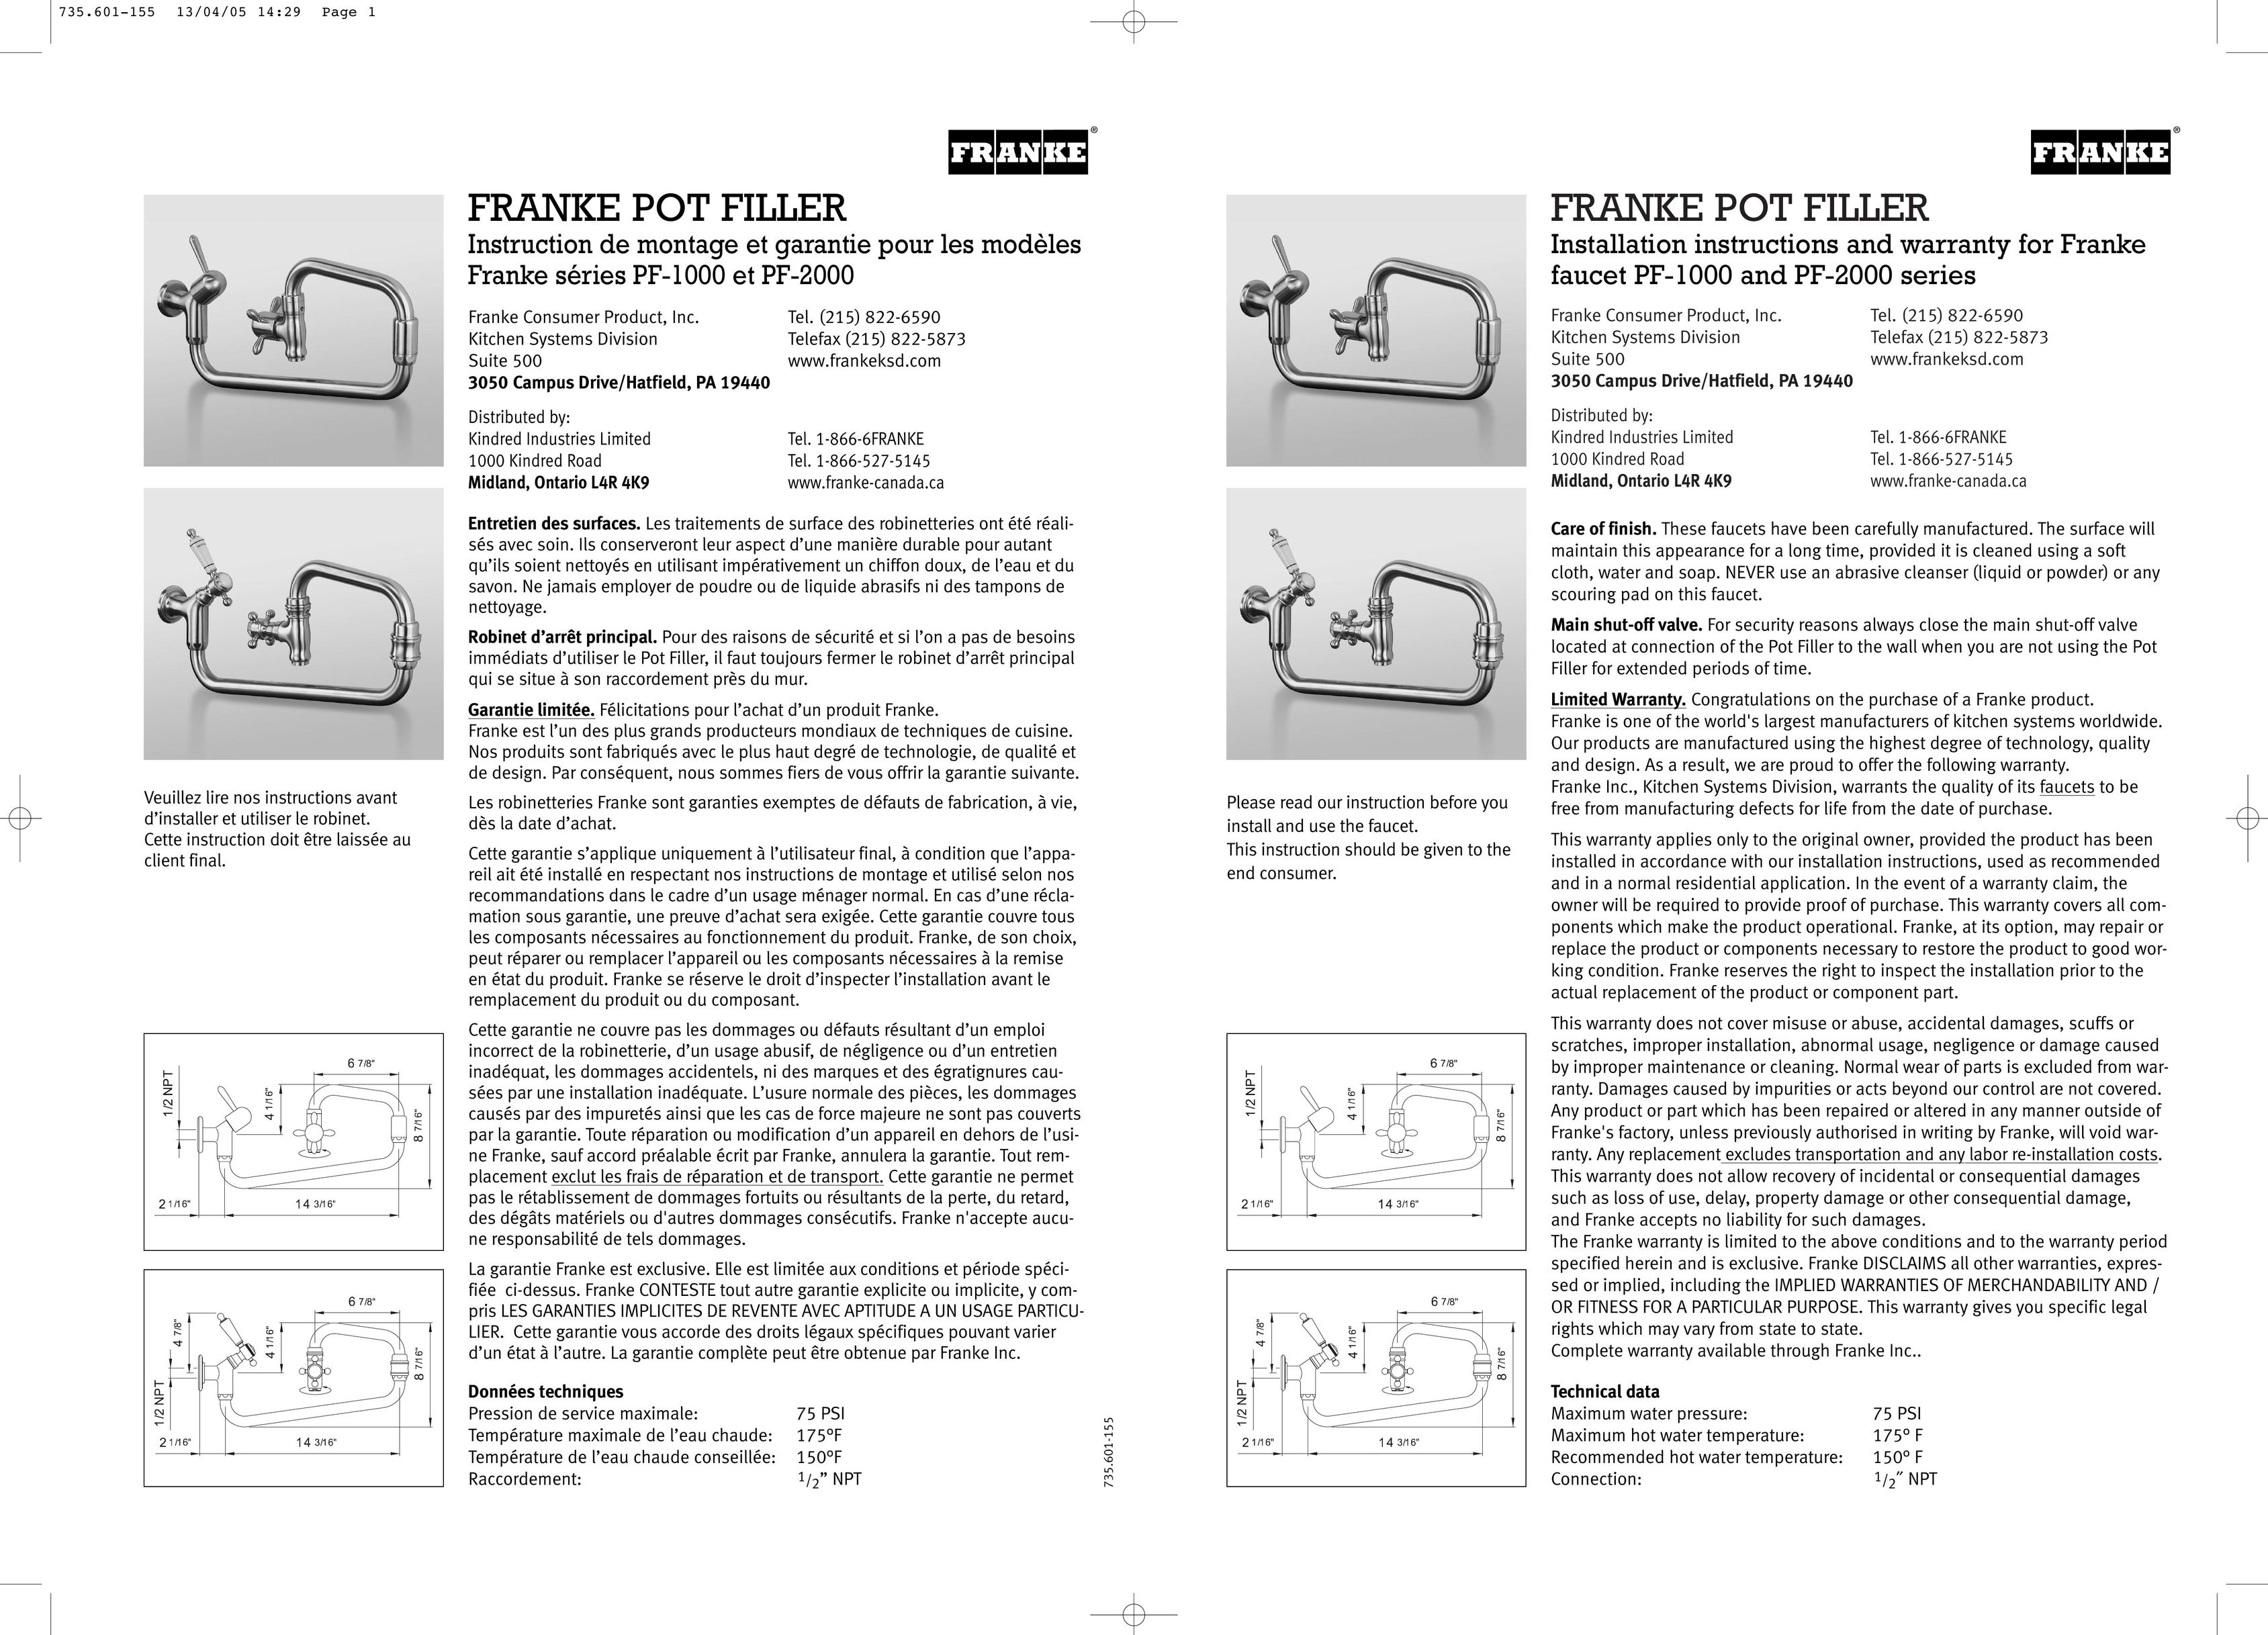 Franke Consumer Products PF-1000 Plumbing Product User Manual